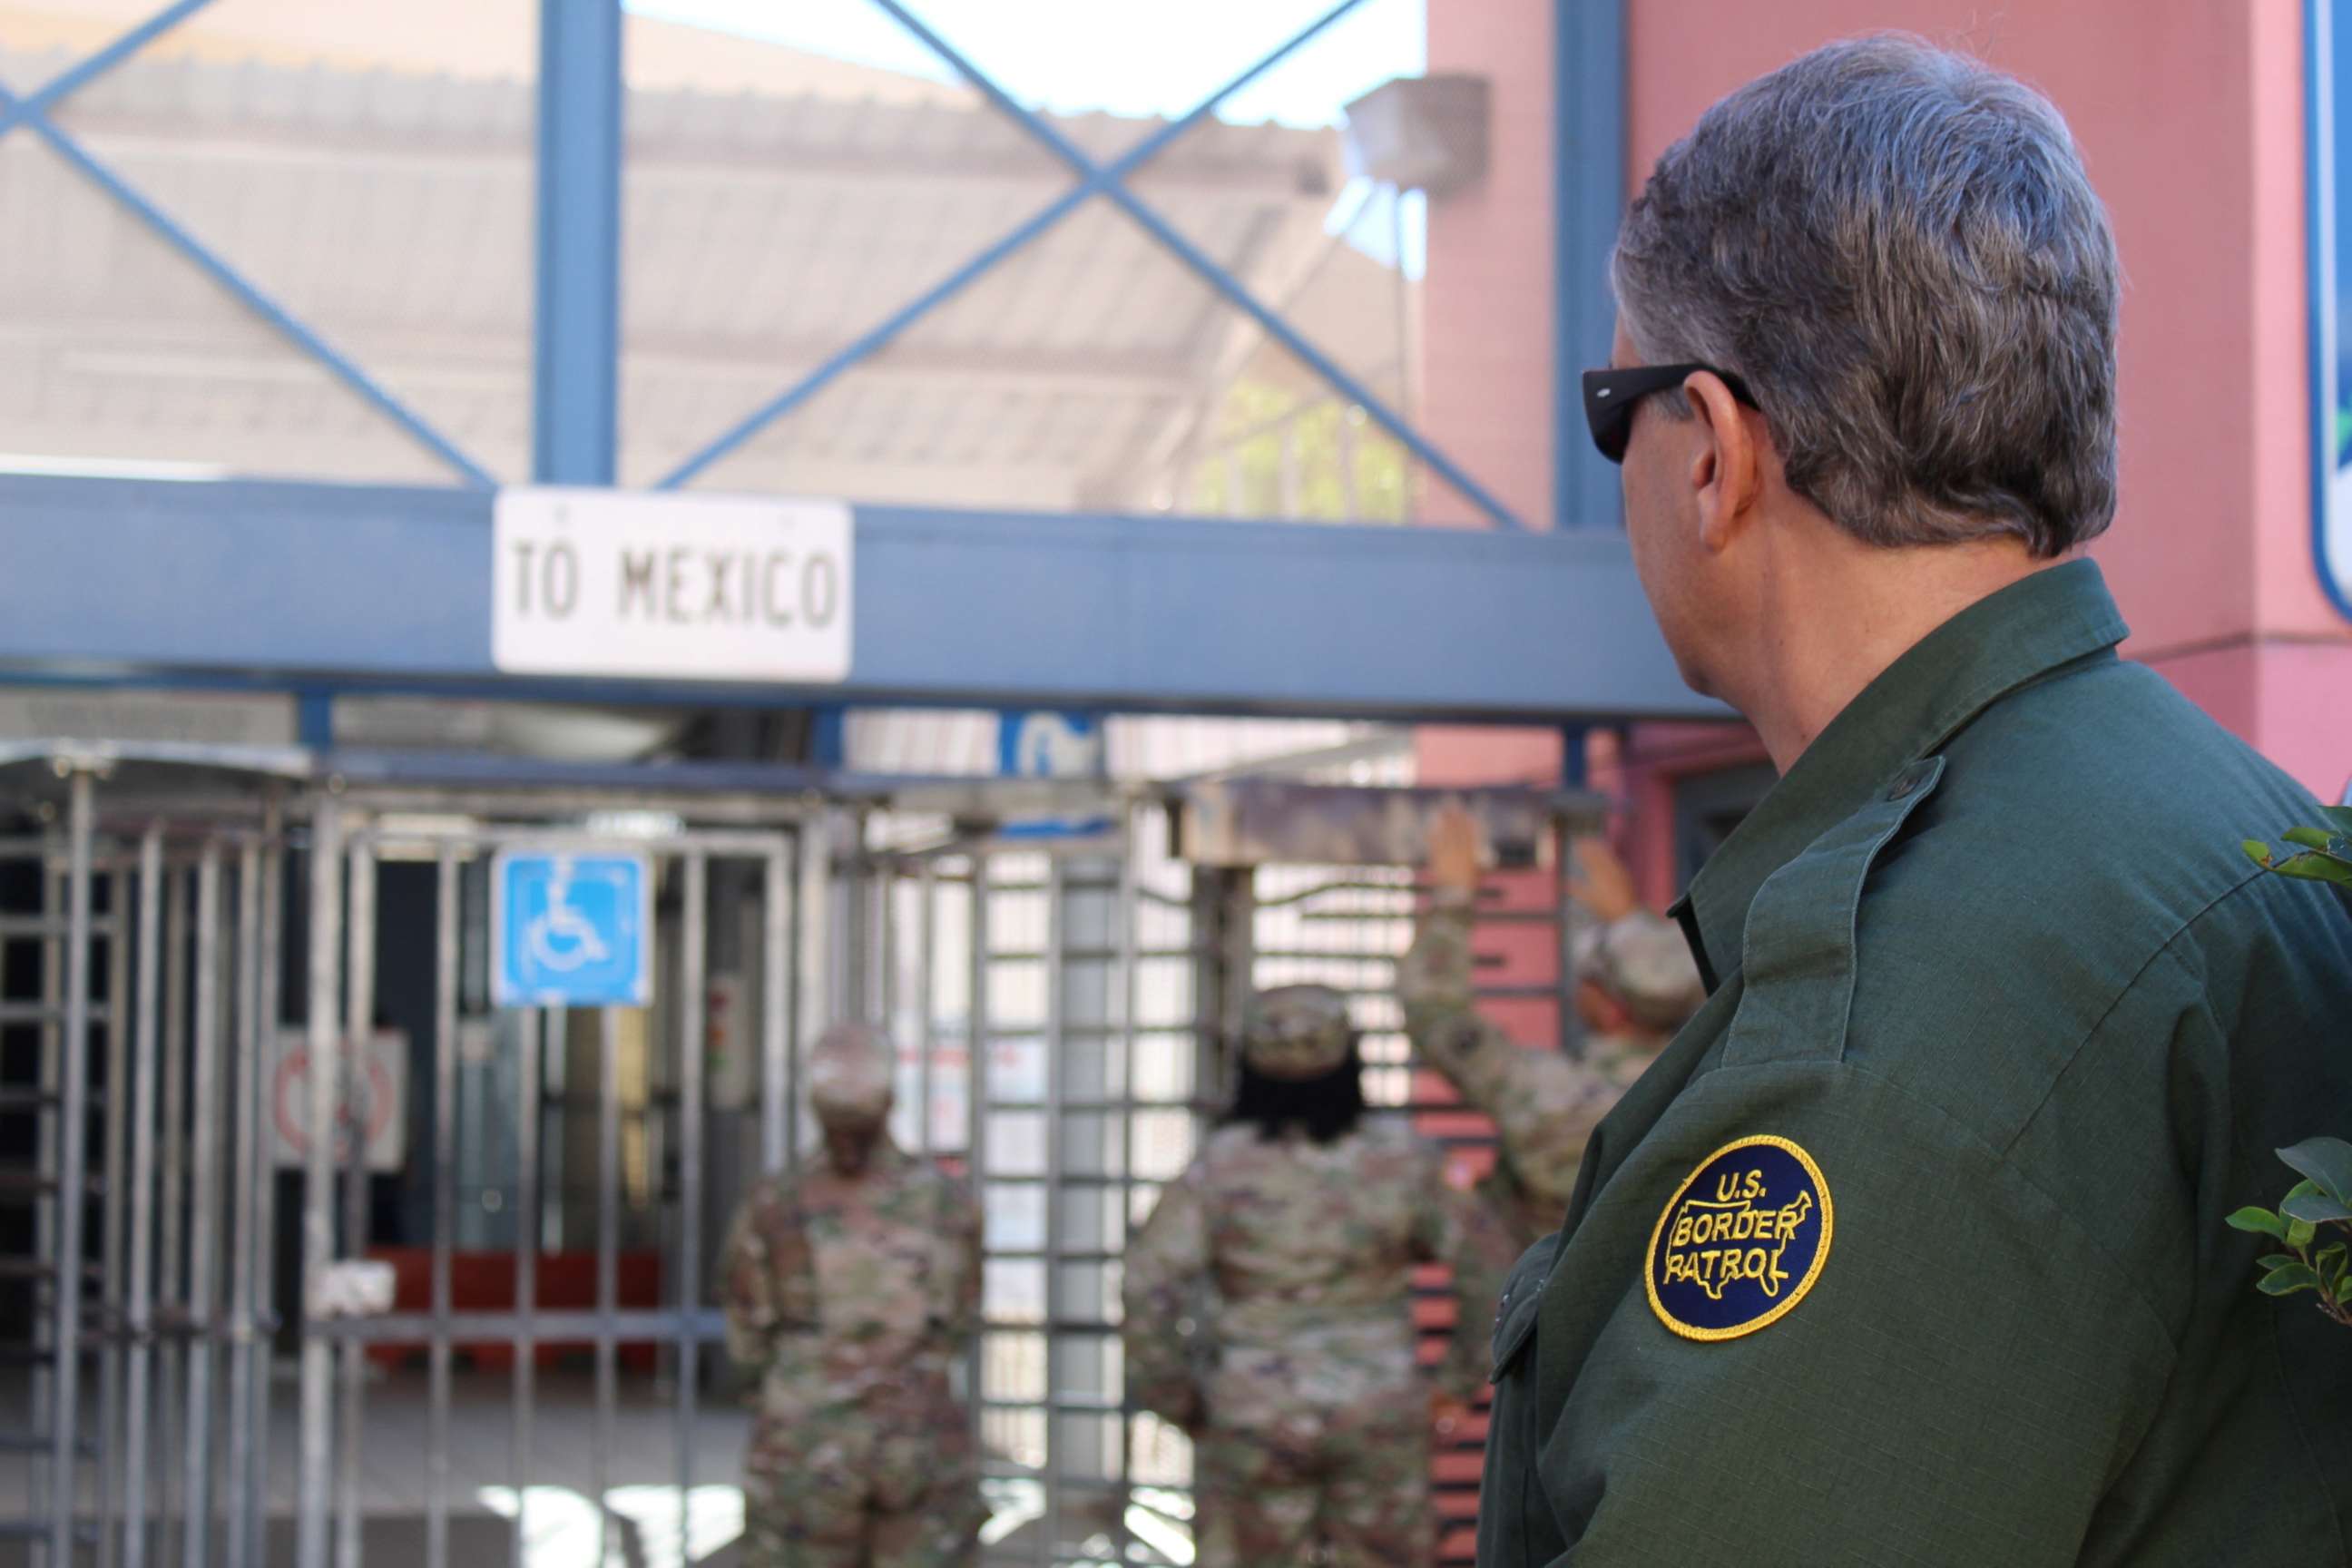 PHOTO: A U.S. Customs and Border Protection (CBP) agent watches while U.S. Army Engineers conduct site survey at a point of entry at the Arizona-Mexico border along the southern border of the U.S., Nov. 6, 2018.